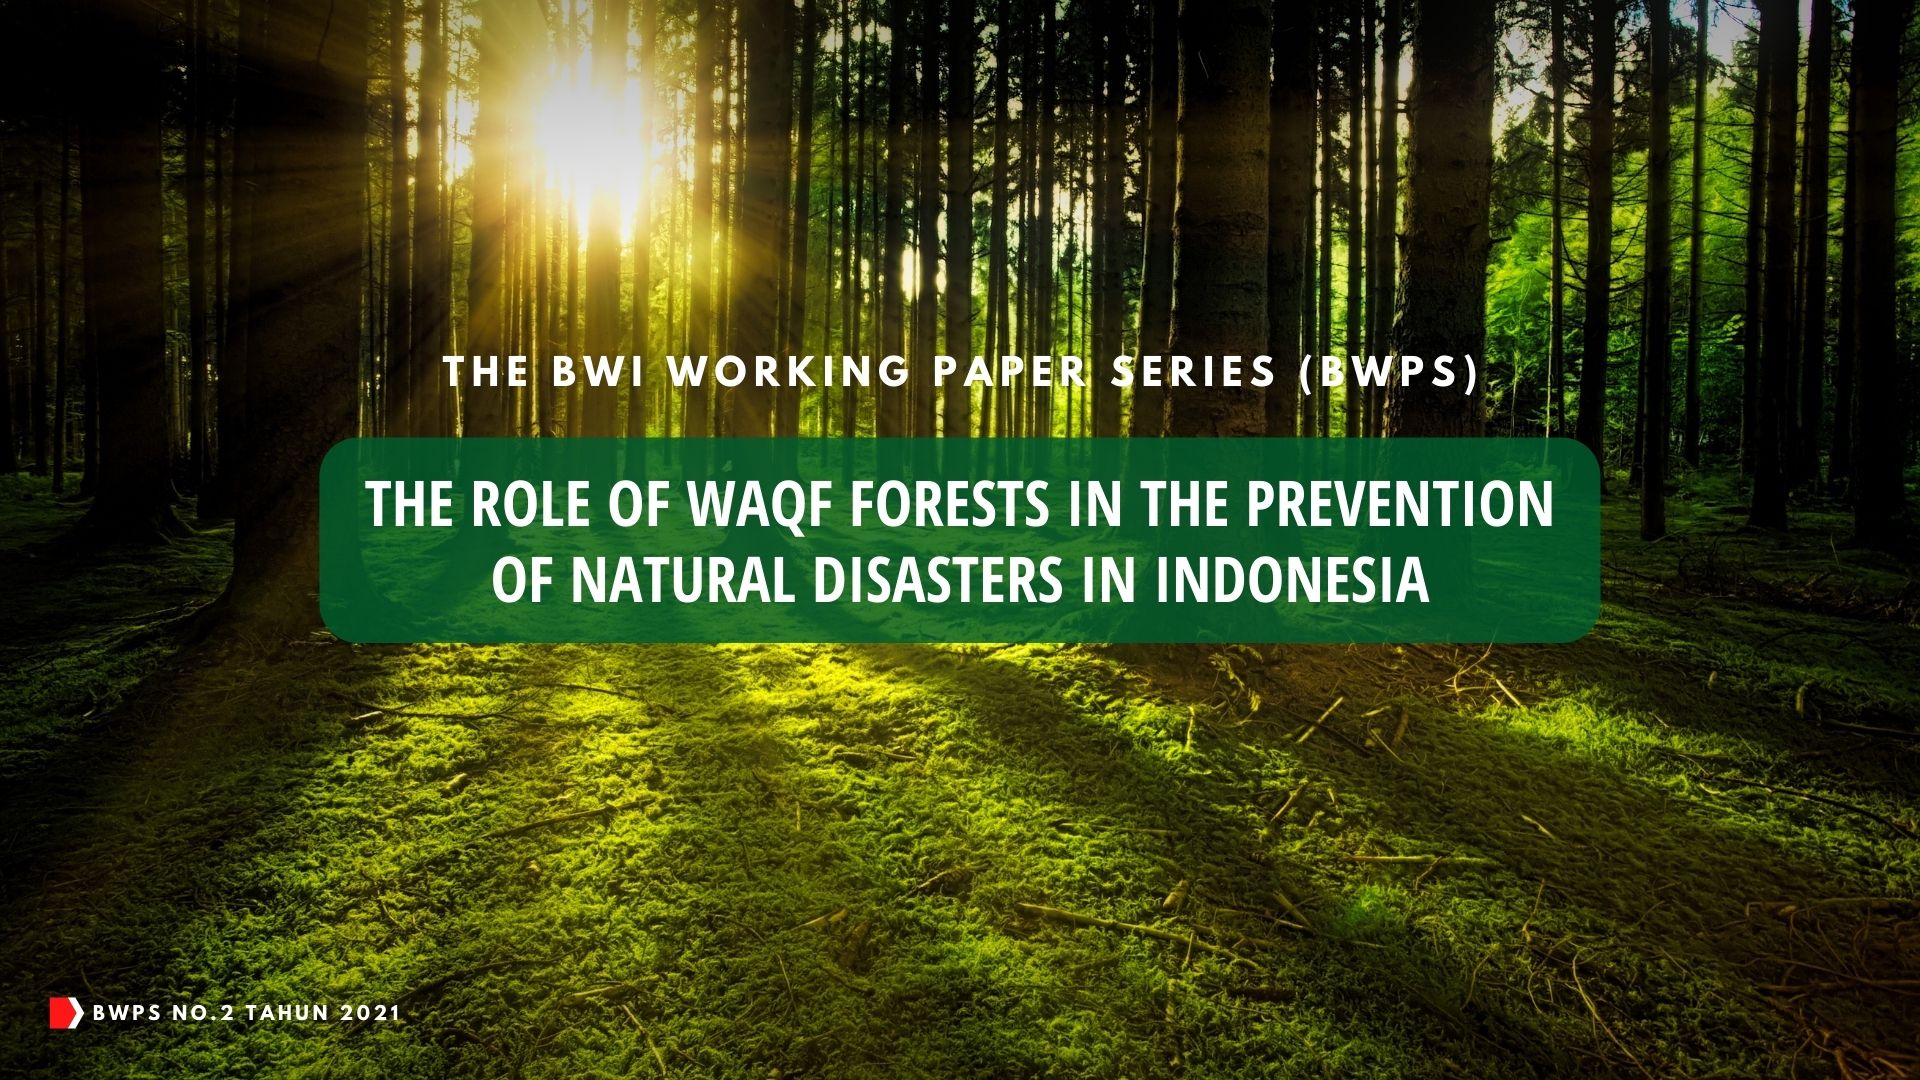 The Role of Waqf Forests in the Prevention of Natural Disasters in Indonesia – BWPS No. 2, 2021  - BWPS No - The Role of Waqf Forests in the Prevention of Natural Disasters in Indonesia &#8211; BWPS No. 2, 2021